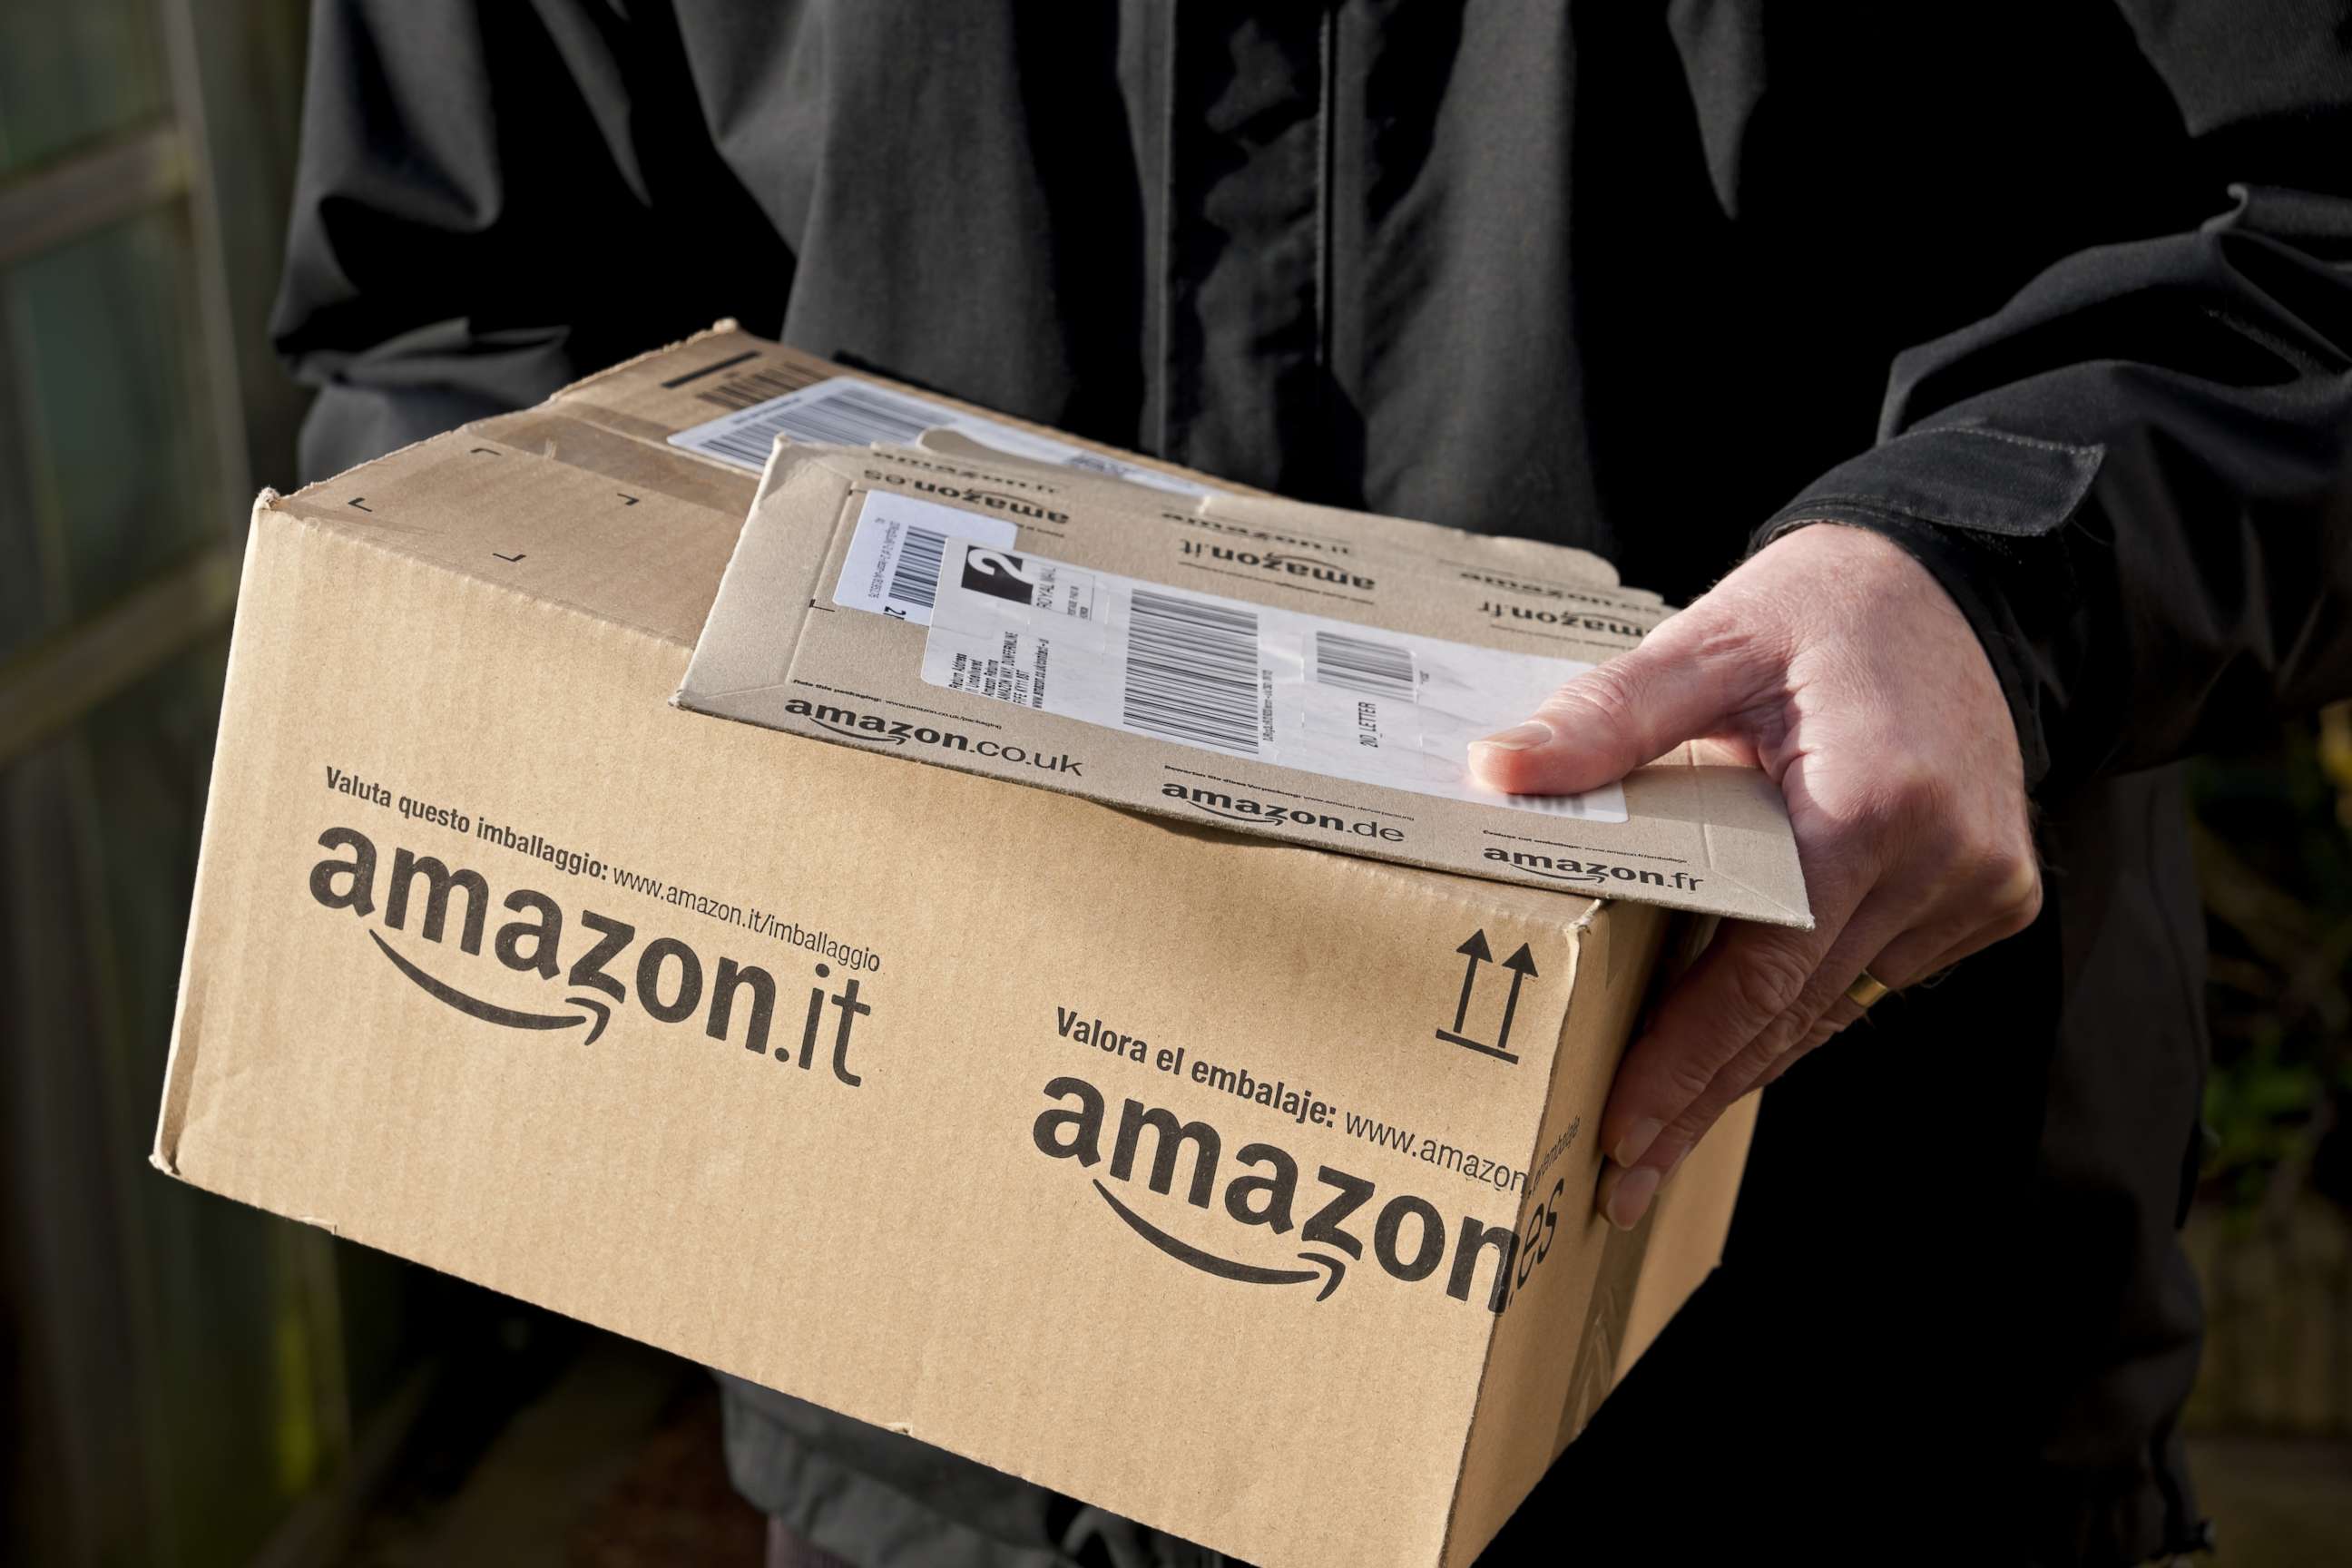 PHOTO: A man holding an Amazon delivery, Feb. 4, 2013, in this file photo.